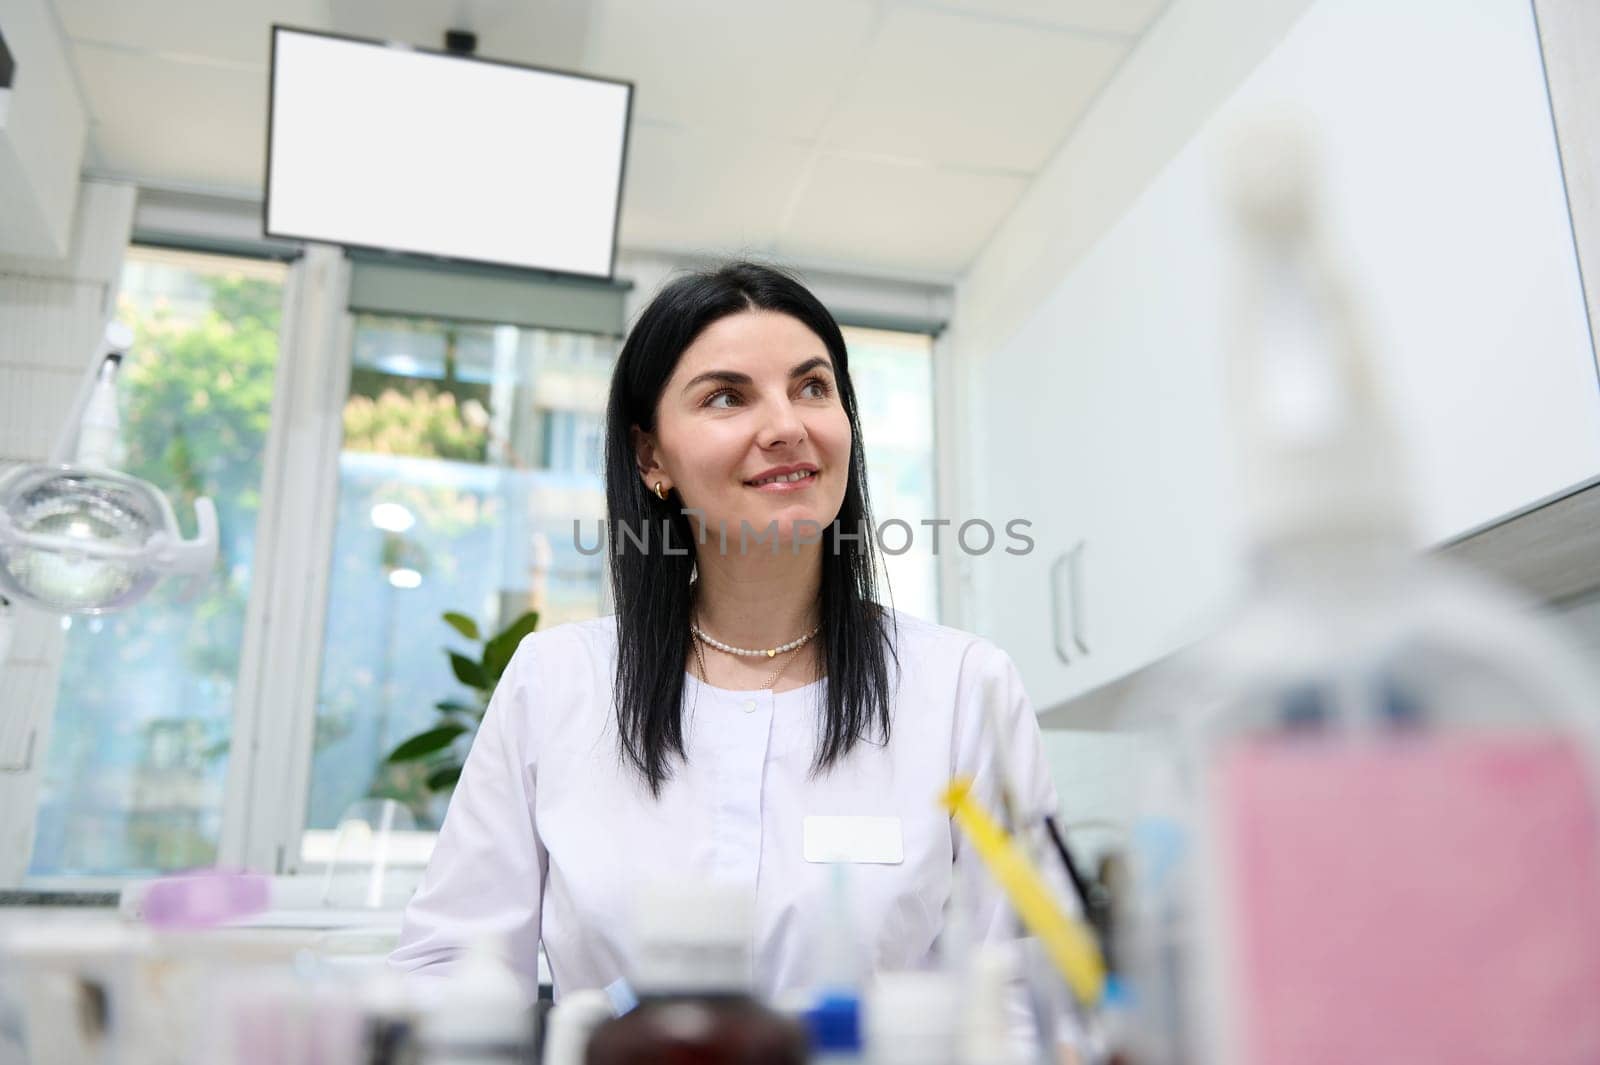 Portrait of smiling beautiful Caucasian woman 30s, experienced confident doctor dentist, dental technician, prosthetic engineer at workplace in dentist's office. Orthodontics Dentistry Dental practice